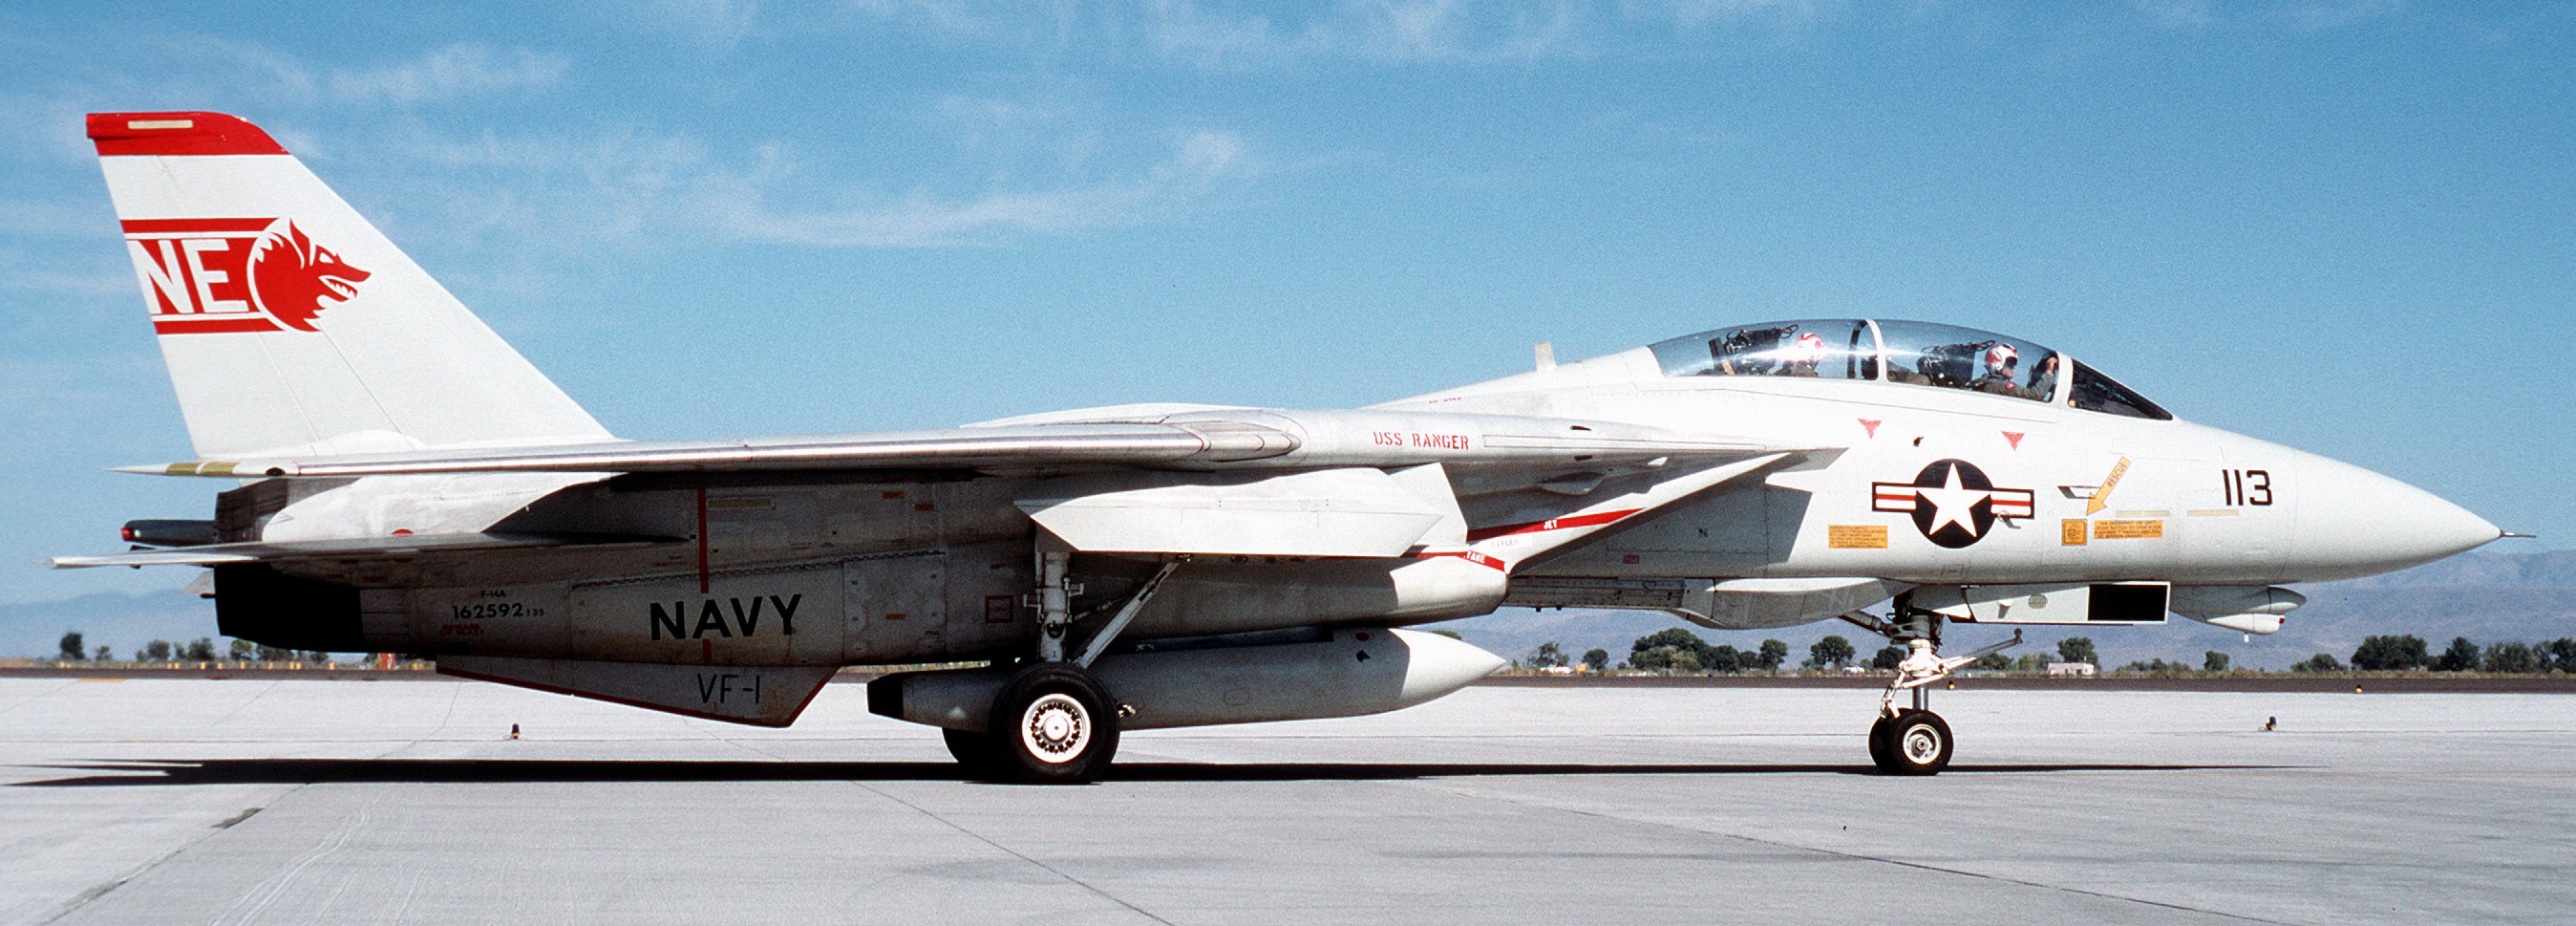 vf-1 wolfpack fighter squadron f-14a tomcat carrier air wing cvw-2 nas fallon nevada 32